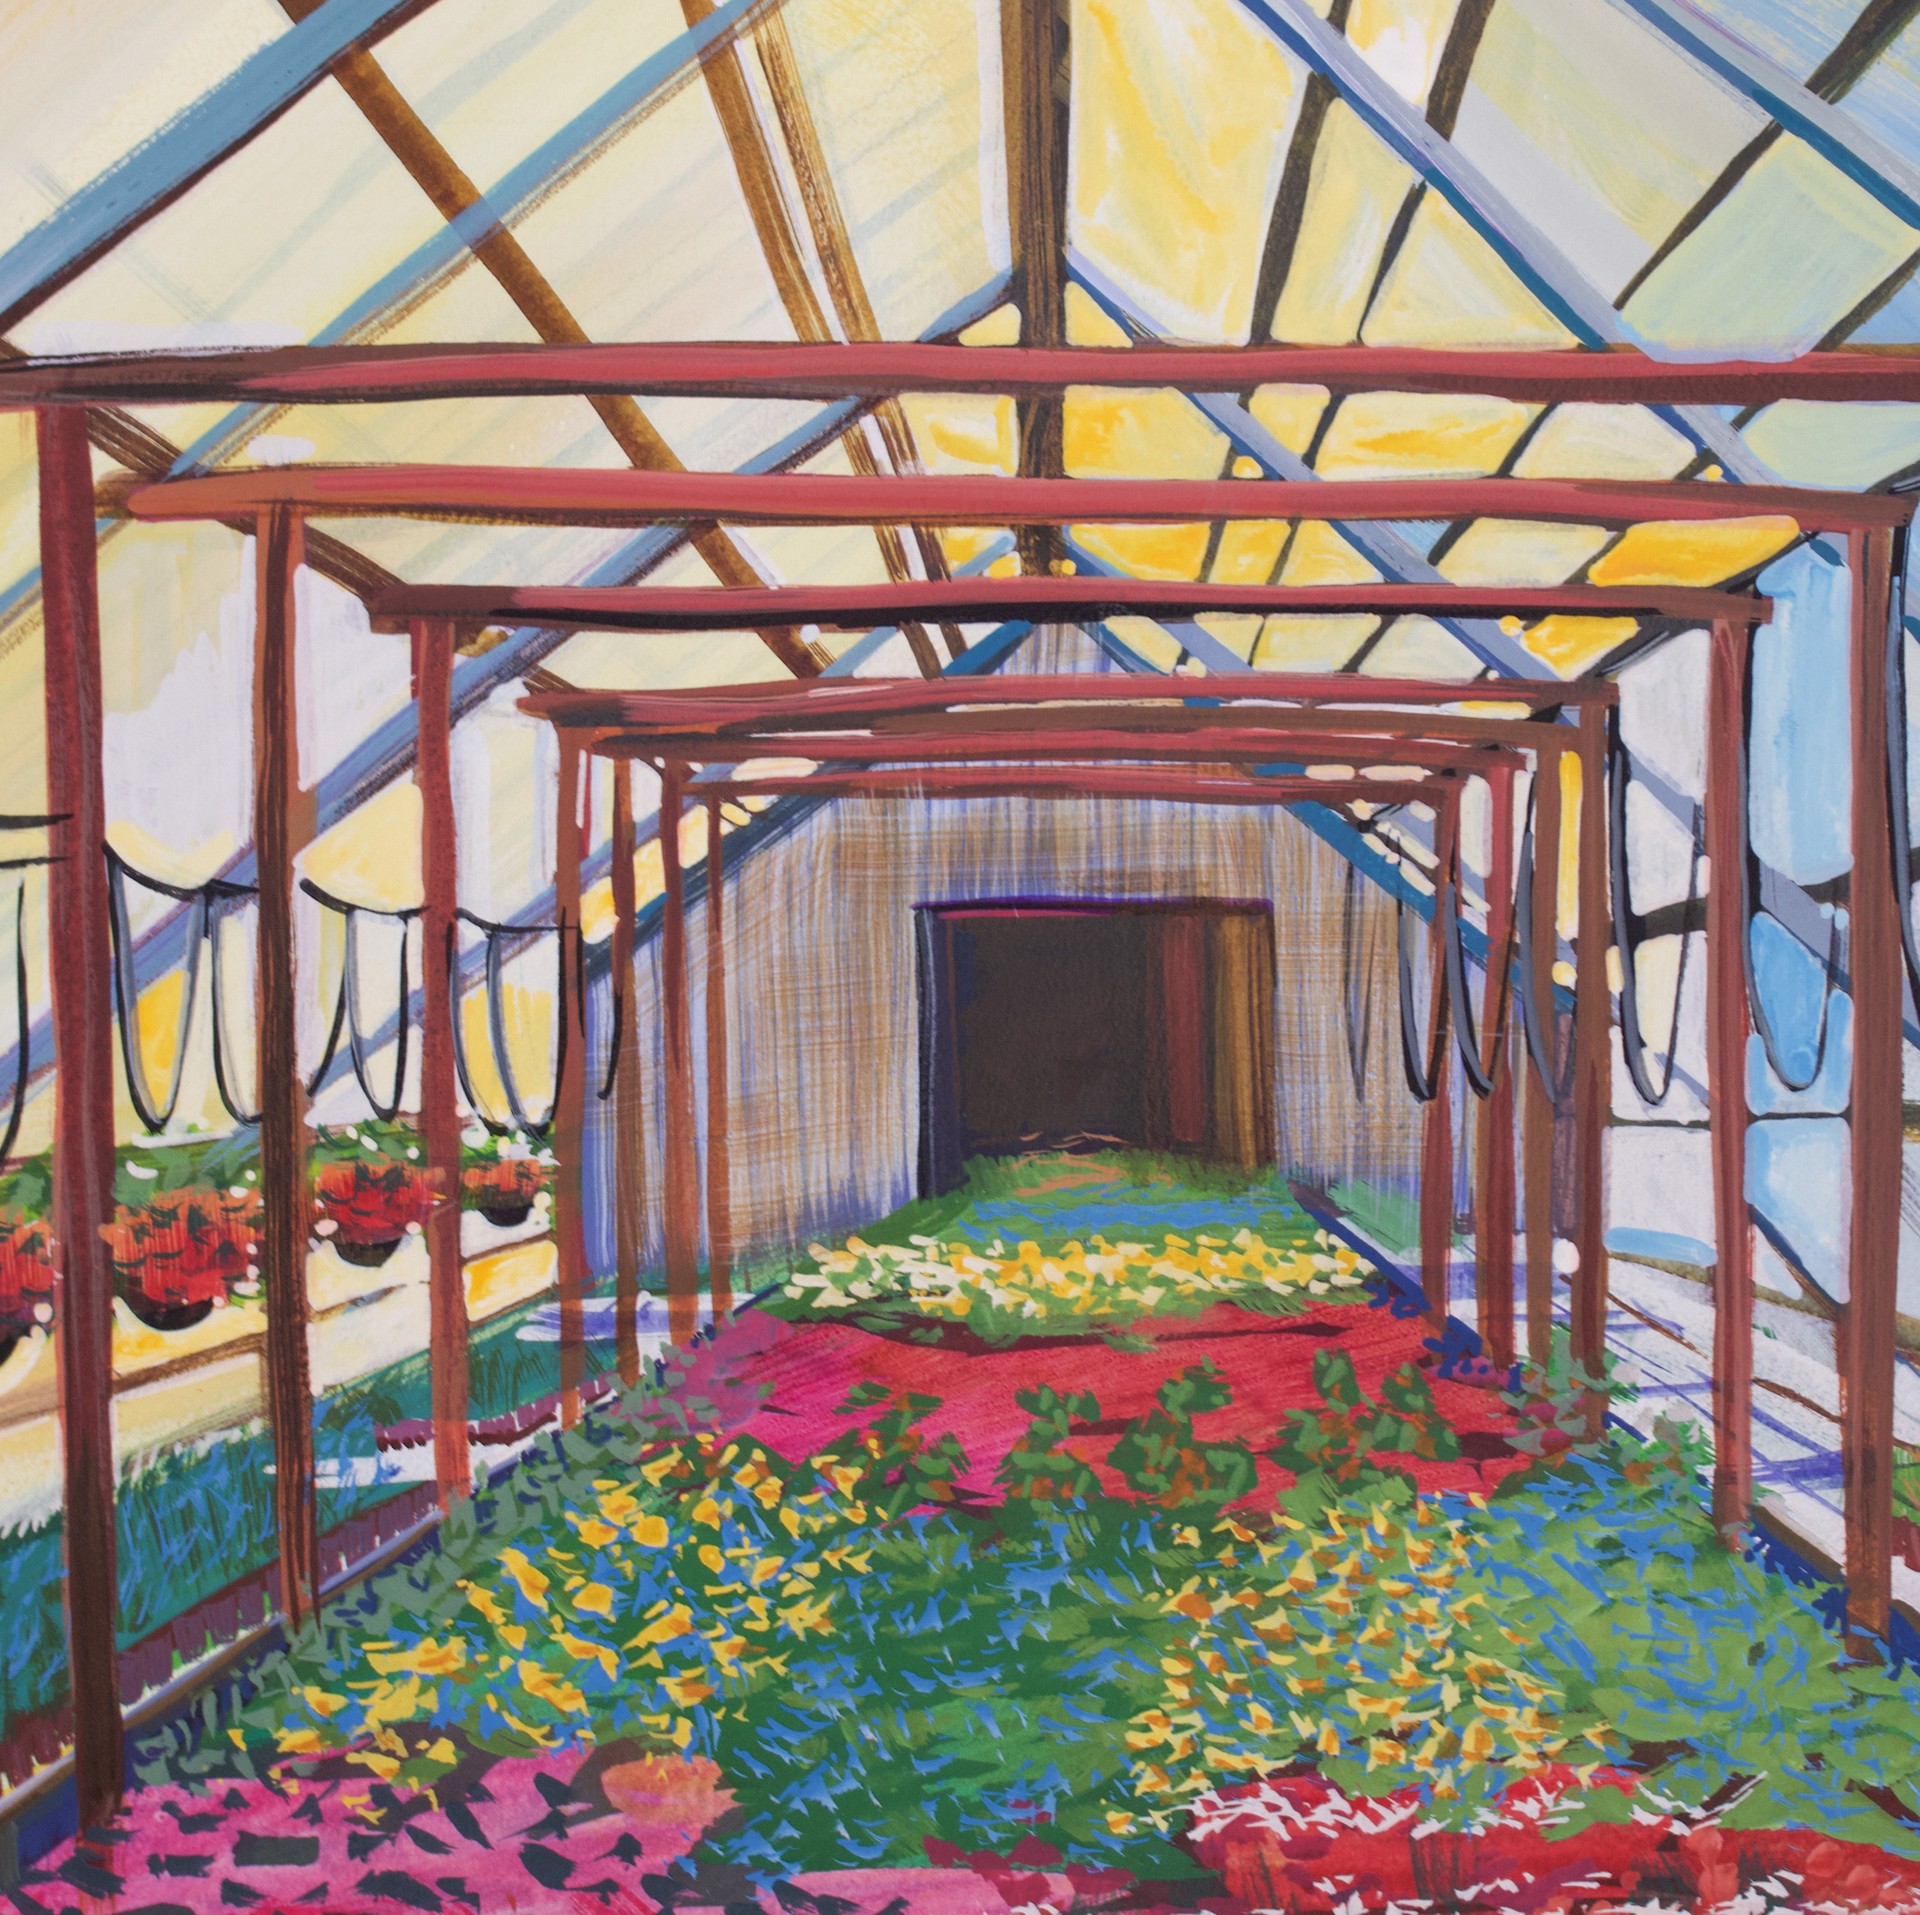 Greenhouse by Missy Dunaway